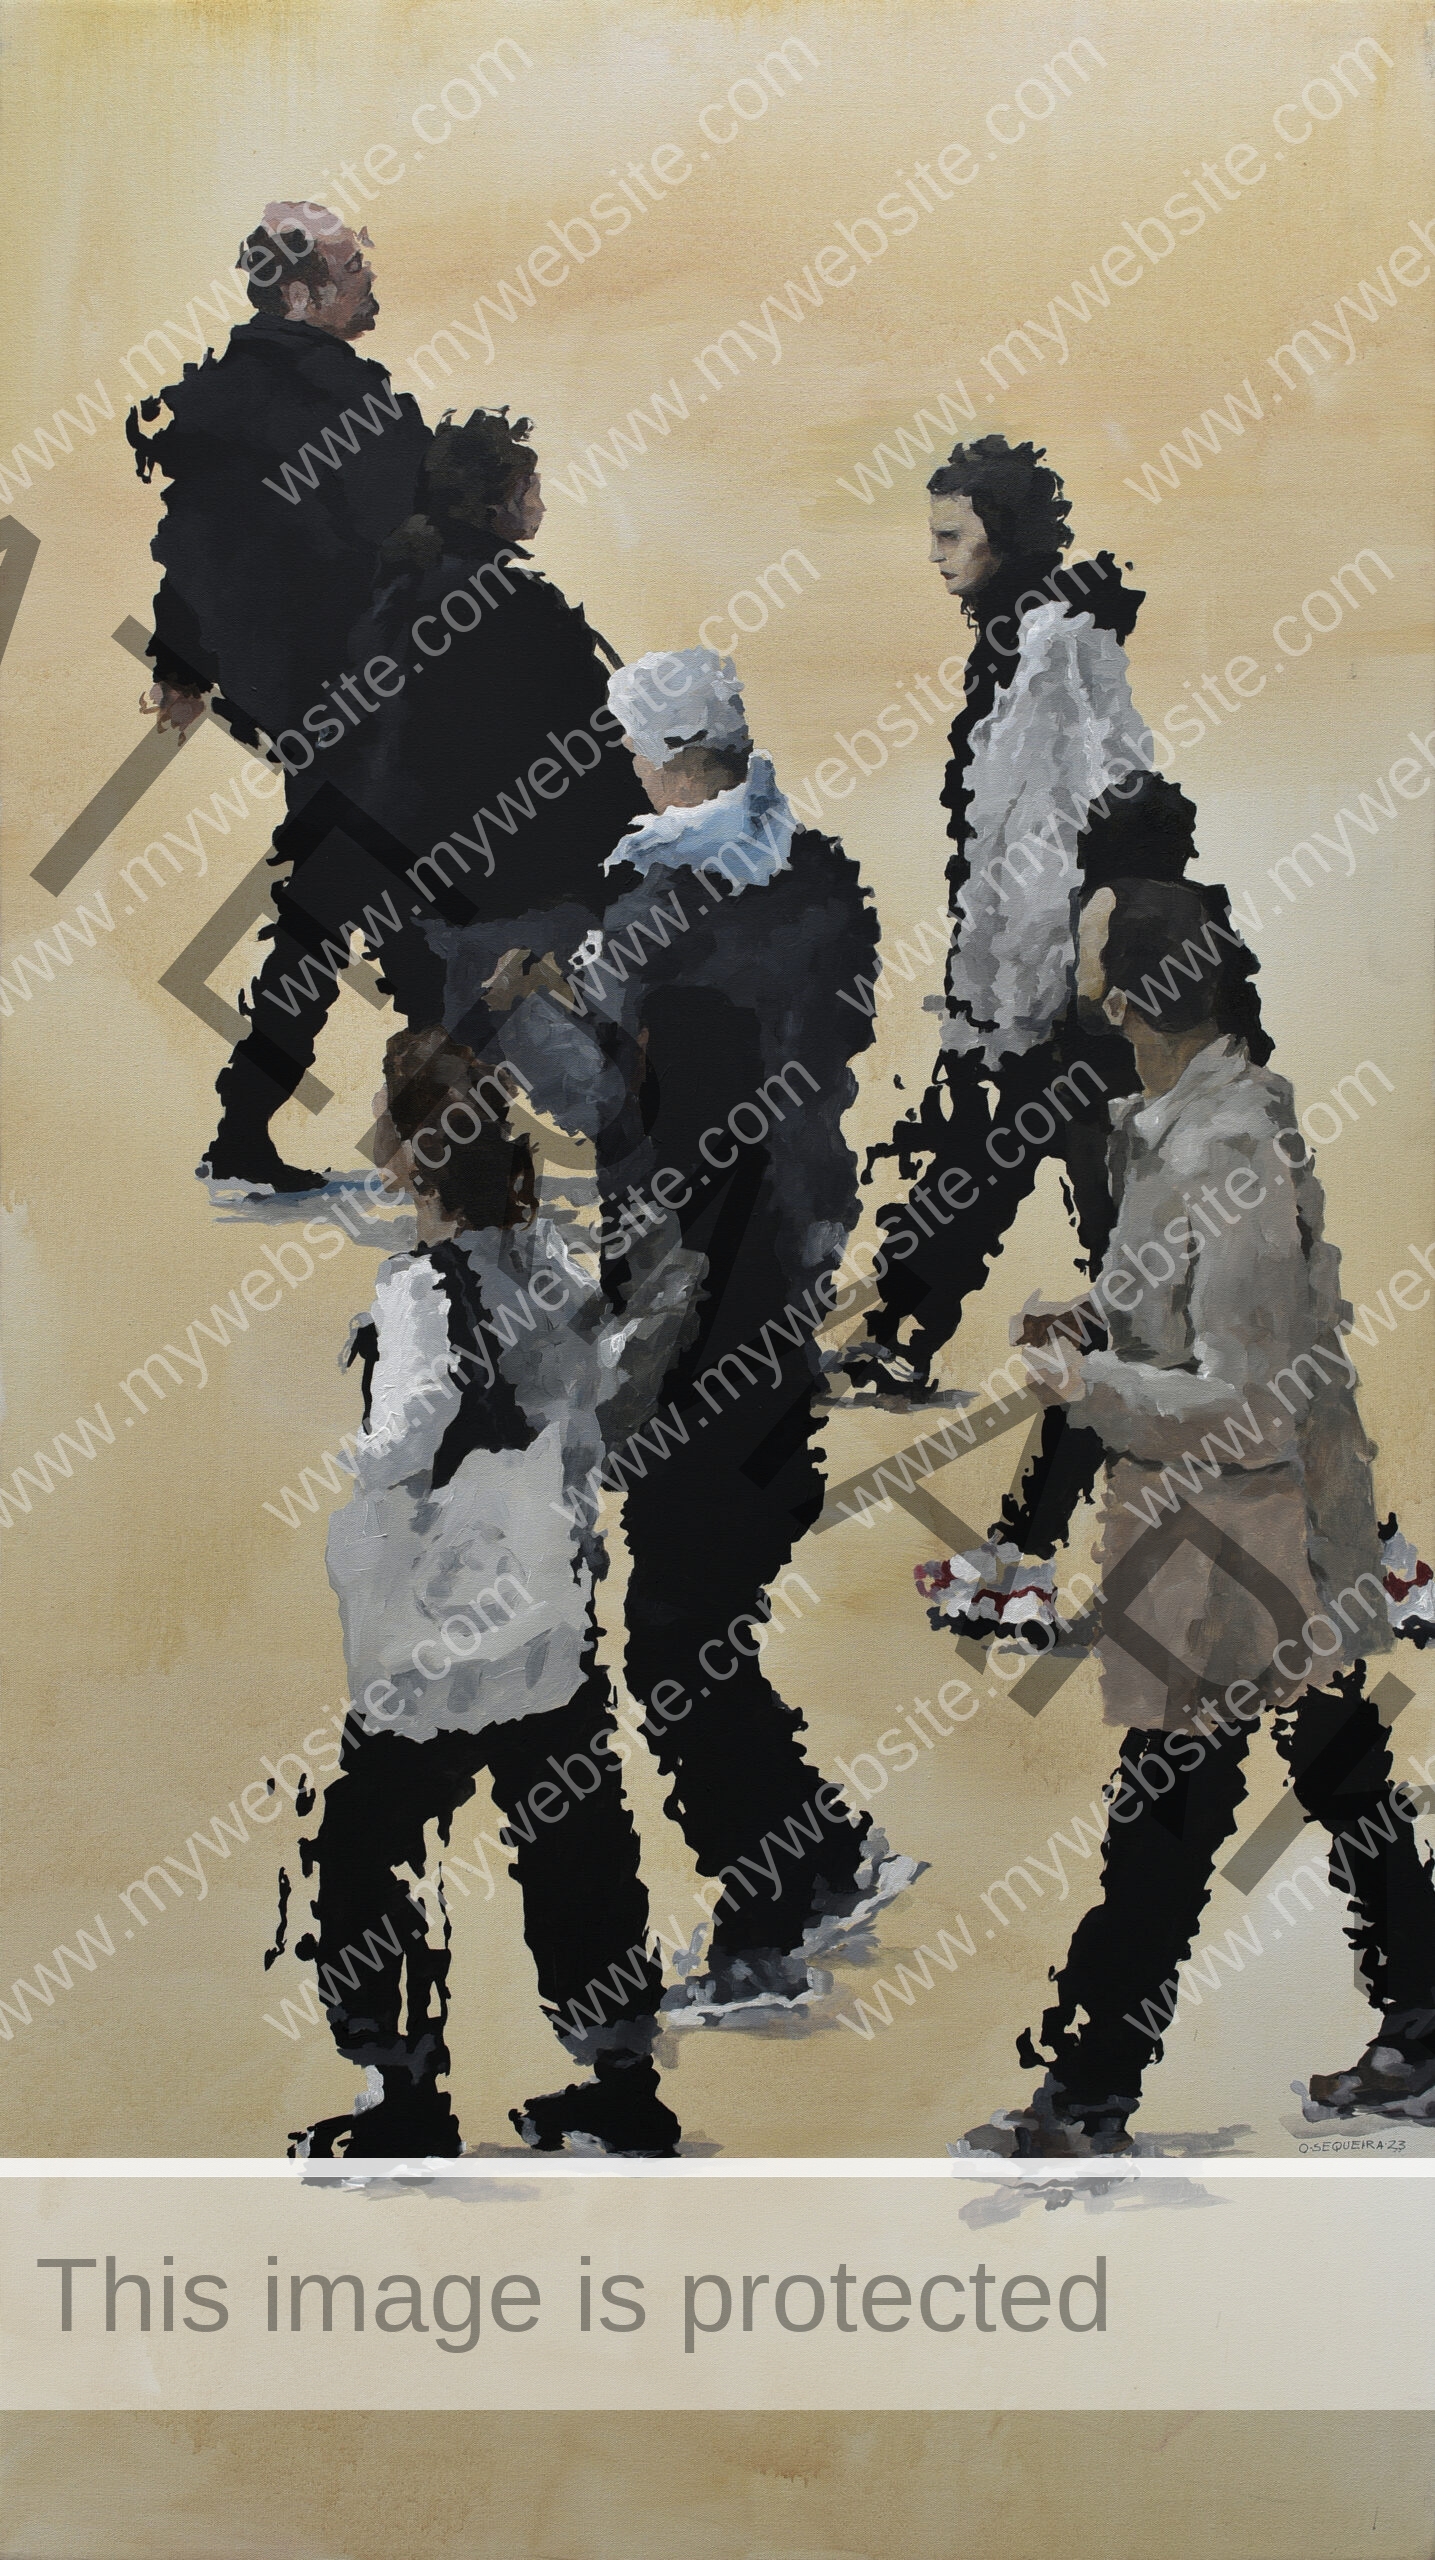 impressionist urban acrylic painting by Osvaldo Sequeira, featuring pastel tones and an abstract urban background with people walking in a open area. Sand colour background. Abstract urban streets painting